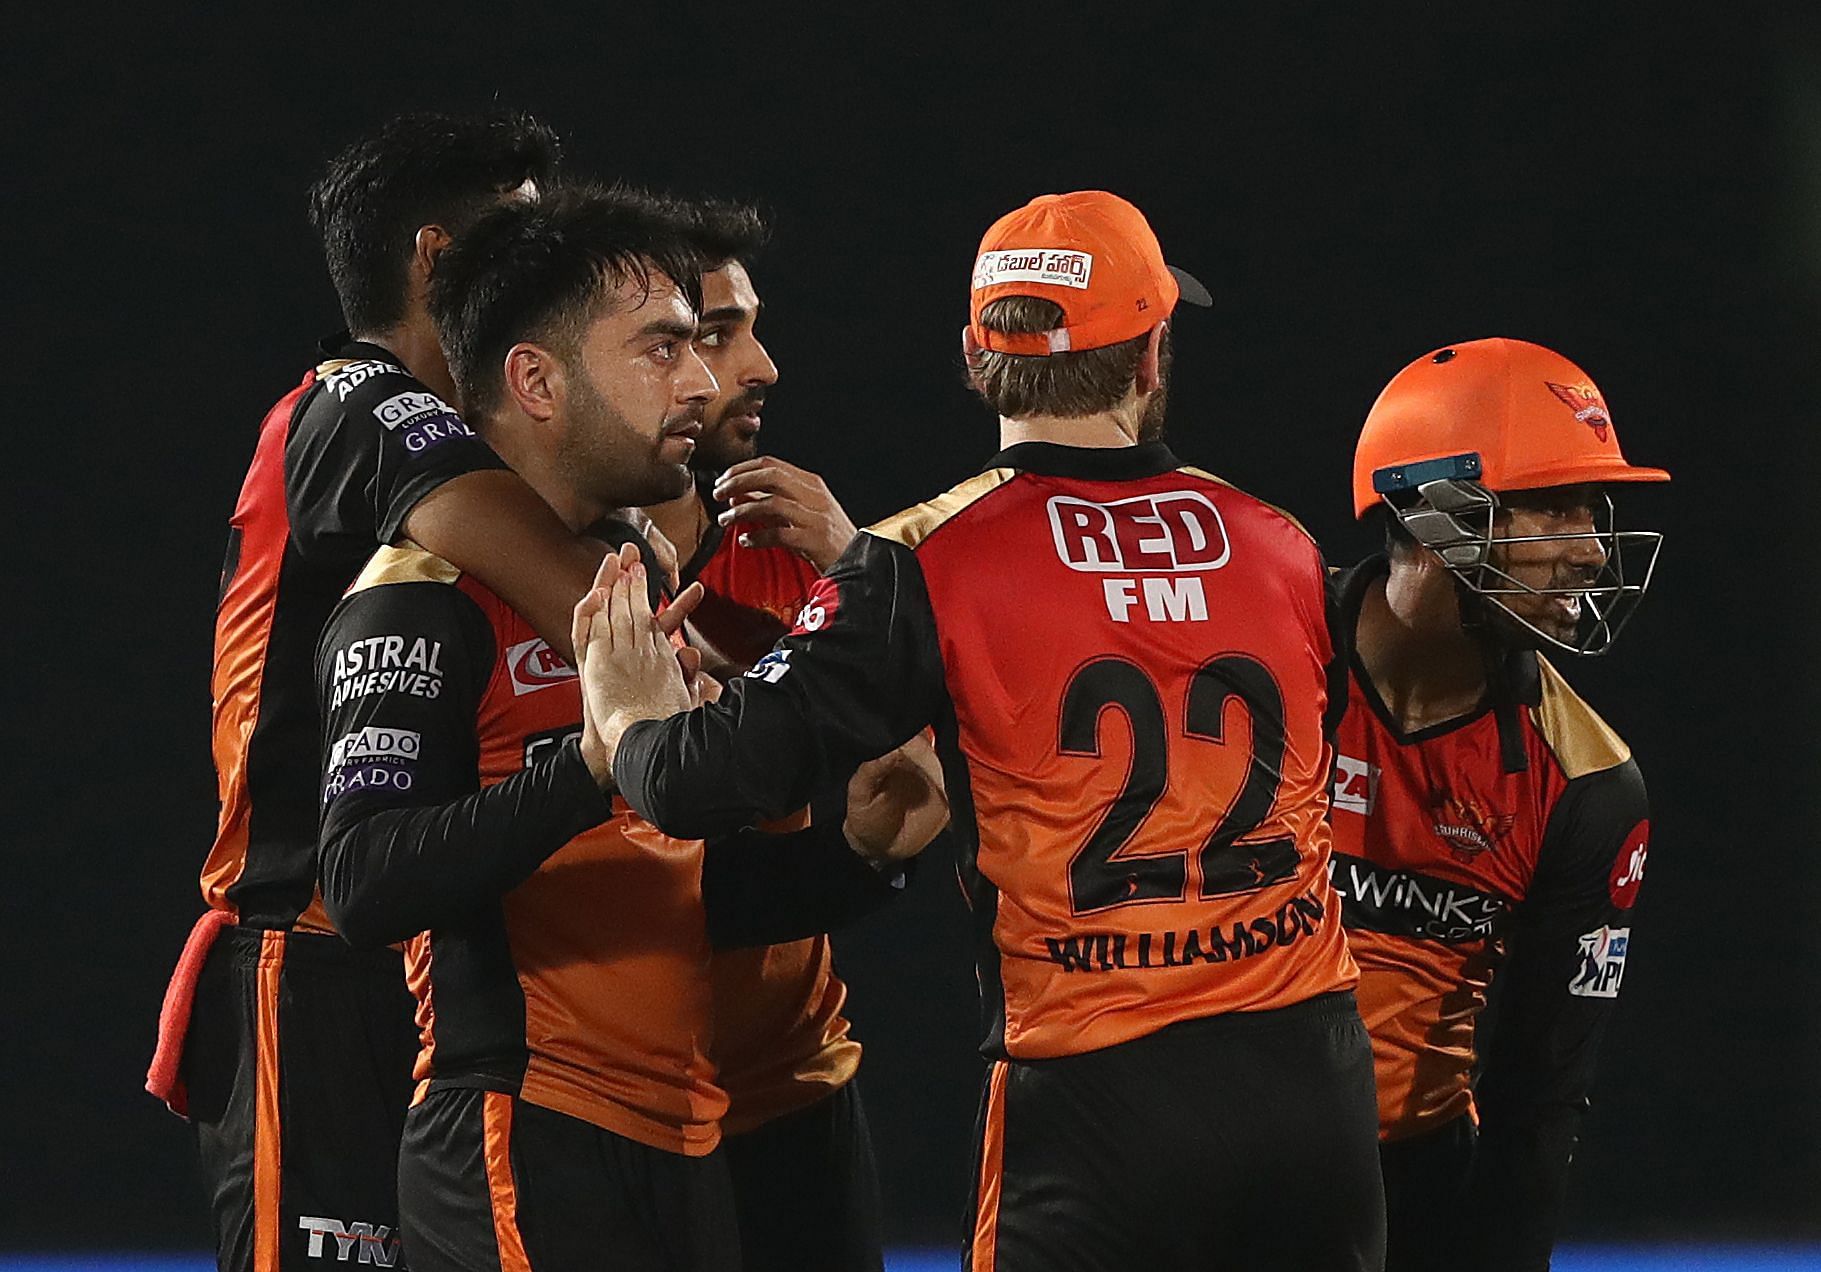 Rashid Khan could be a top pick at IPL Auction 2022